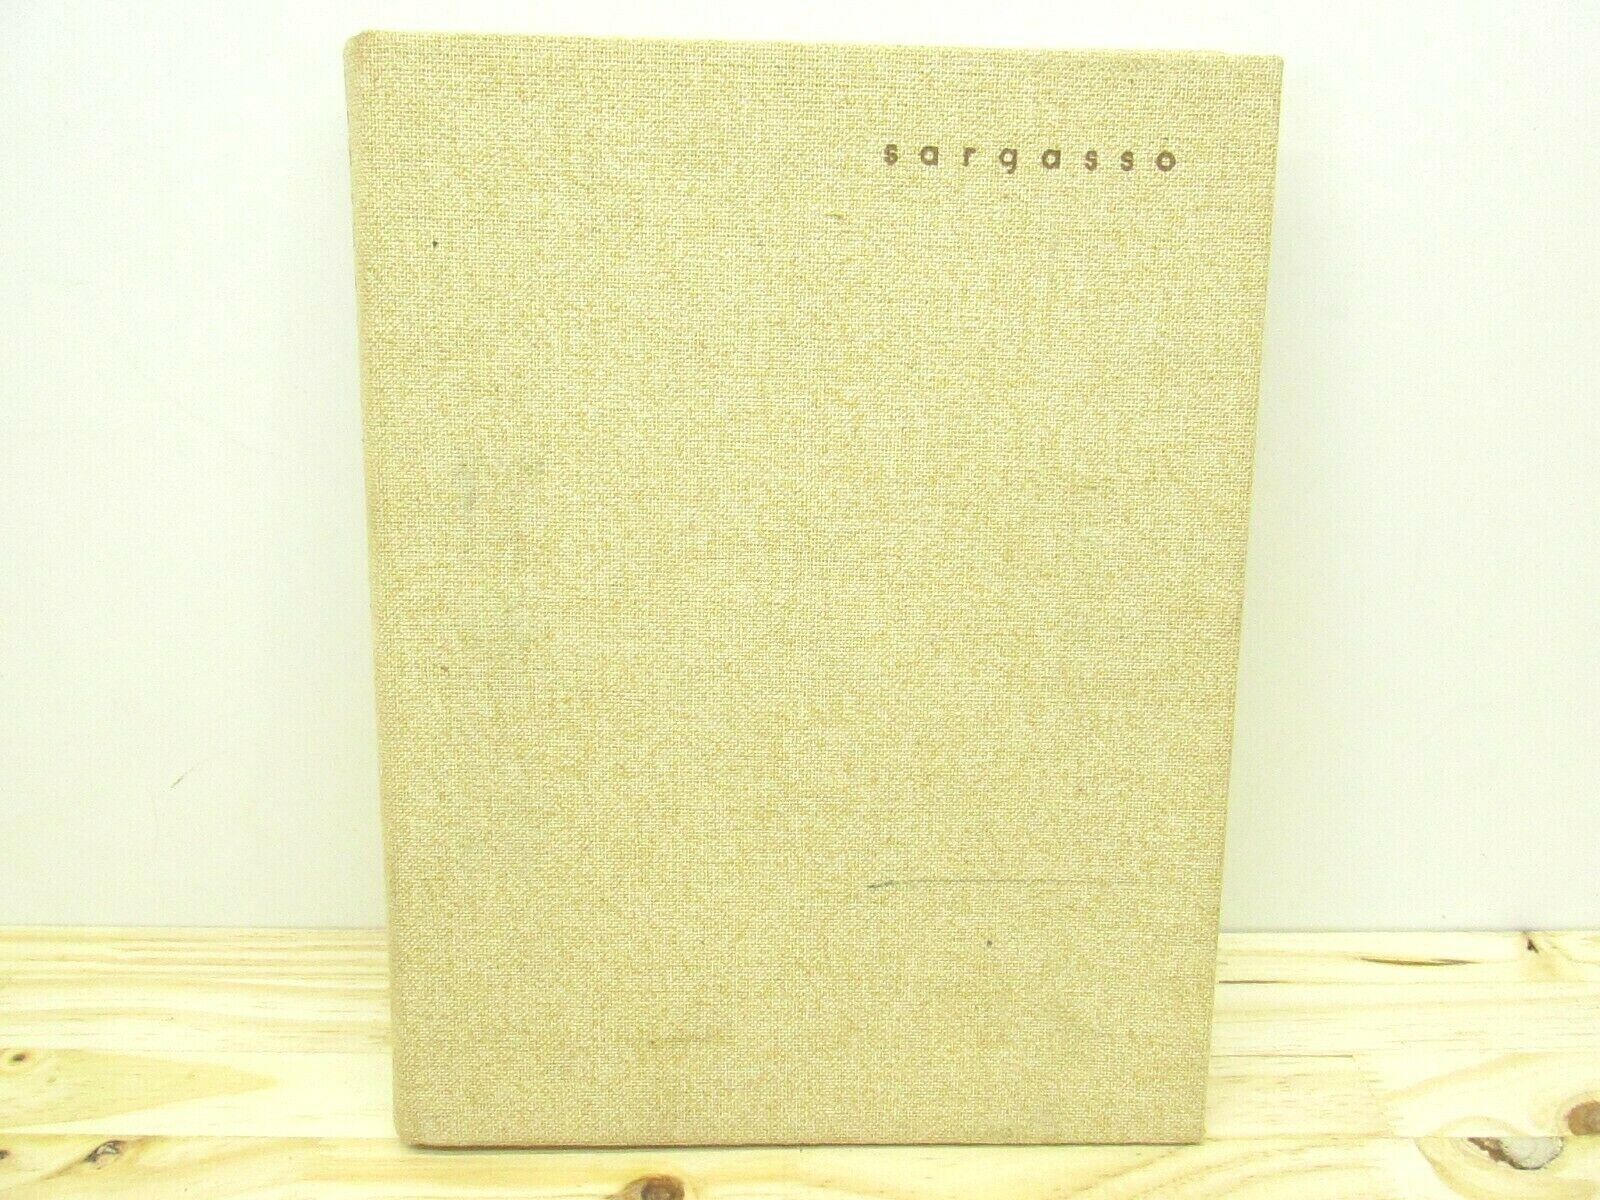 Yearbook: 1959 Earlham College - Sargasso Yearbook (Richmond, IN) Hardcover